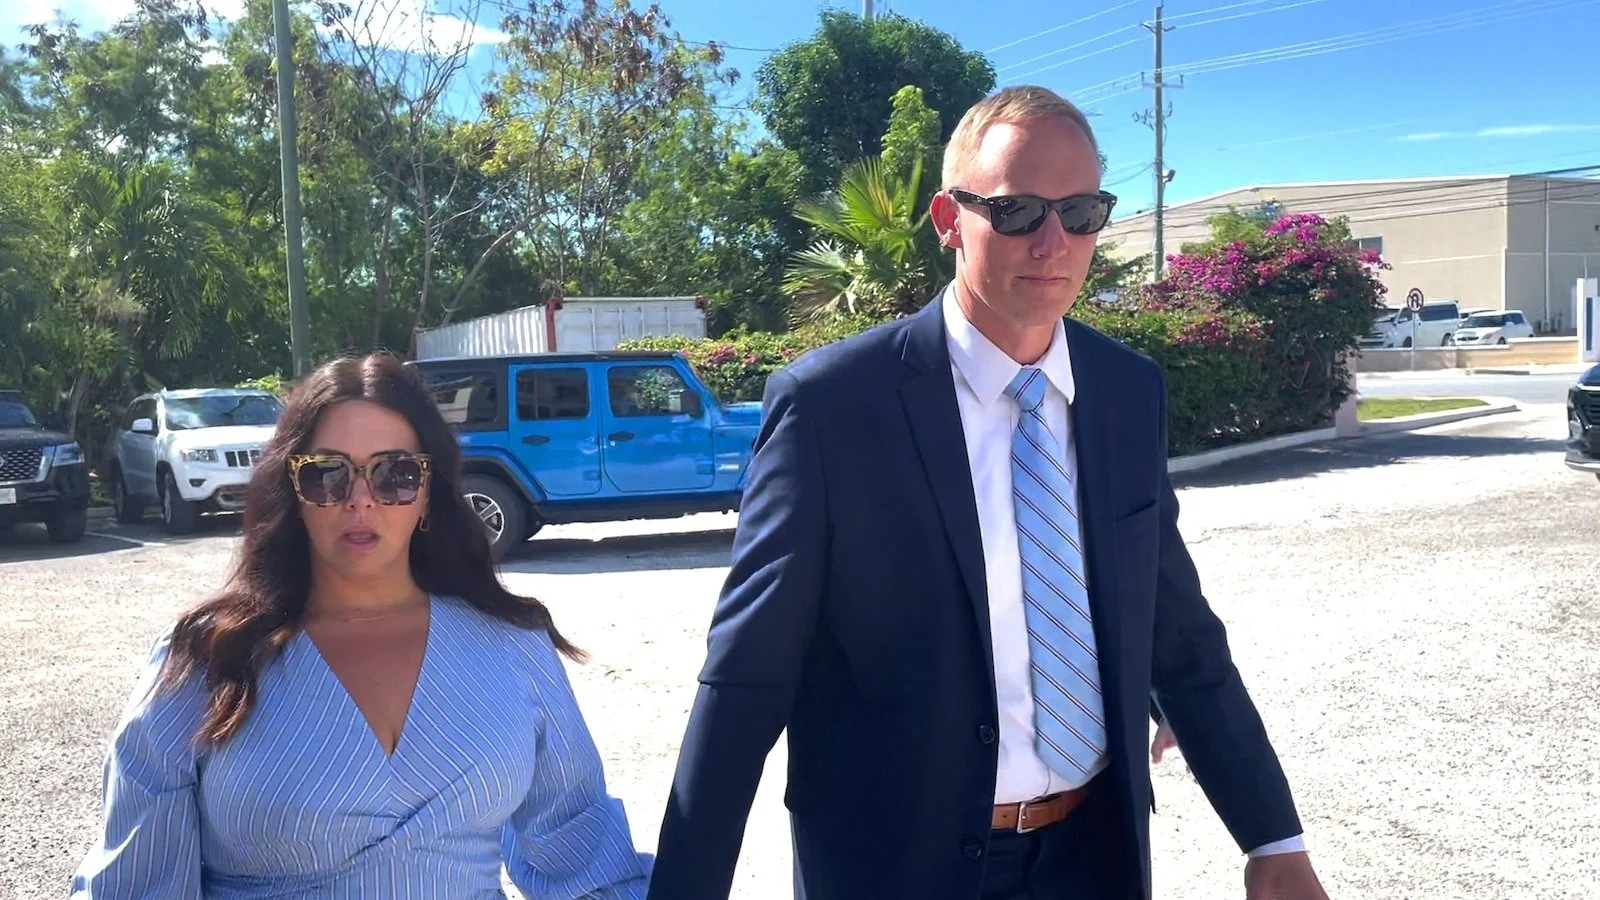 Bryan Hagerich, father arrested for bringing ammunition to Turks and Caicos, returns to US after paying fine